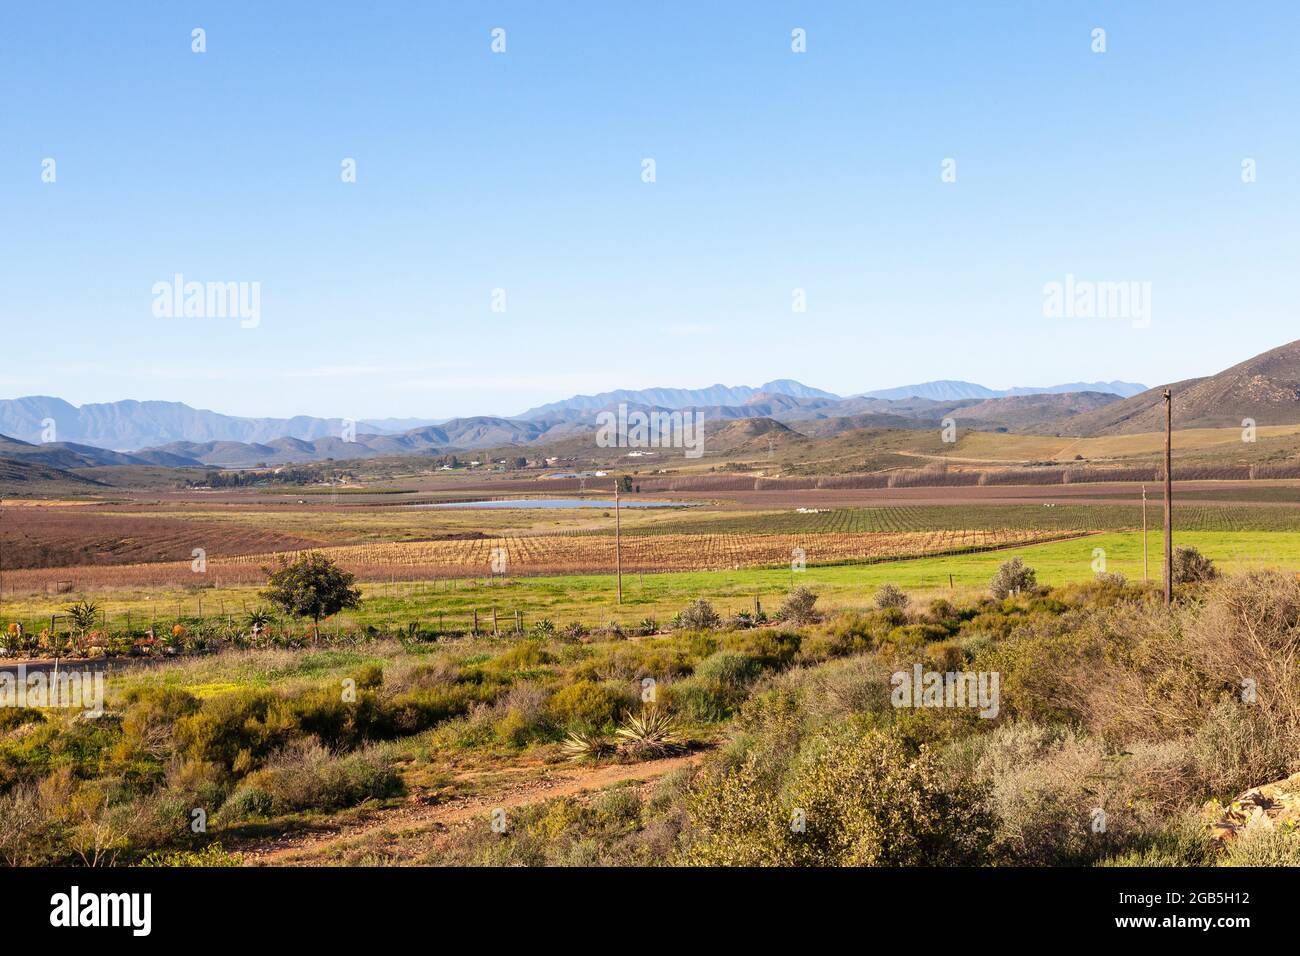 Vineyards in the Mcgregor Valley with a view to the Langeberg Mountains, Western Cape Winelands, South Africa during winter Stock Photo